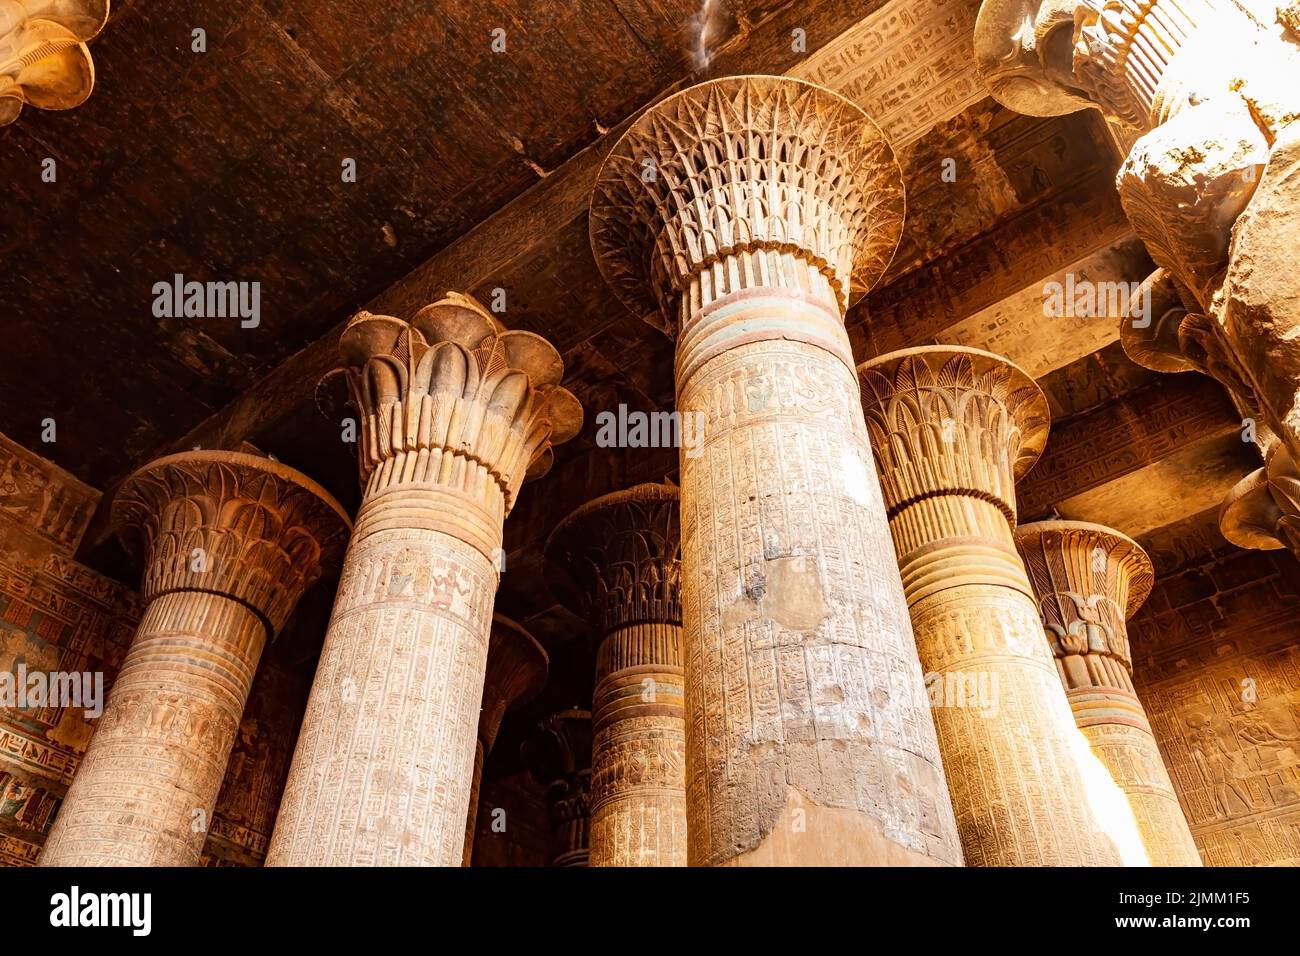 Beautiful decoration at the columns of the Temple of Khnum (the Ram Headed Egyptian God) in Esna. Stock Photo